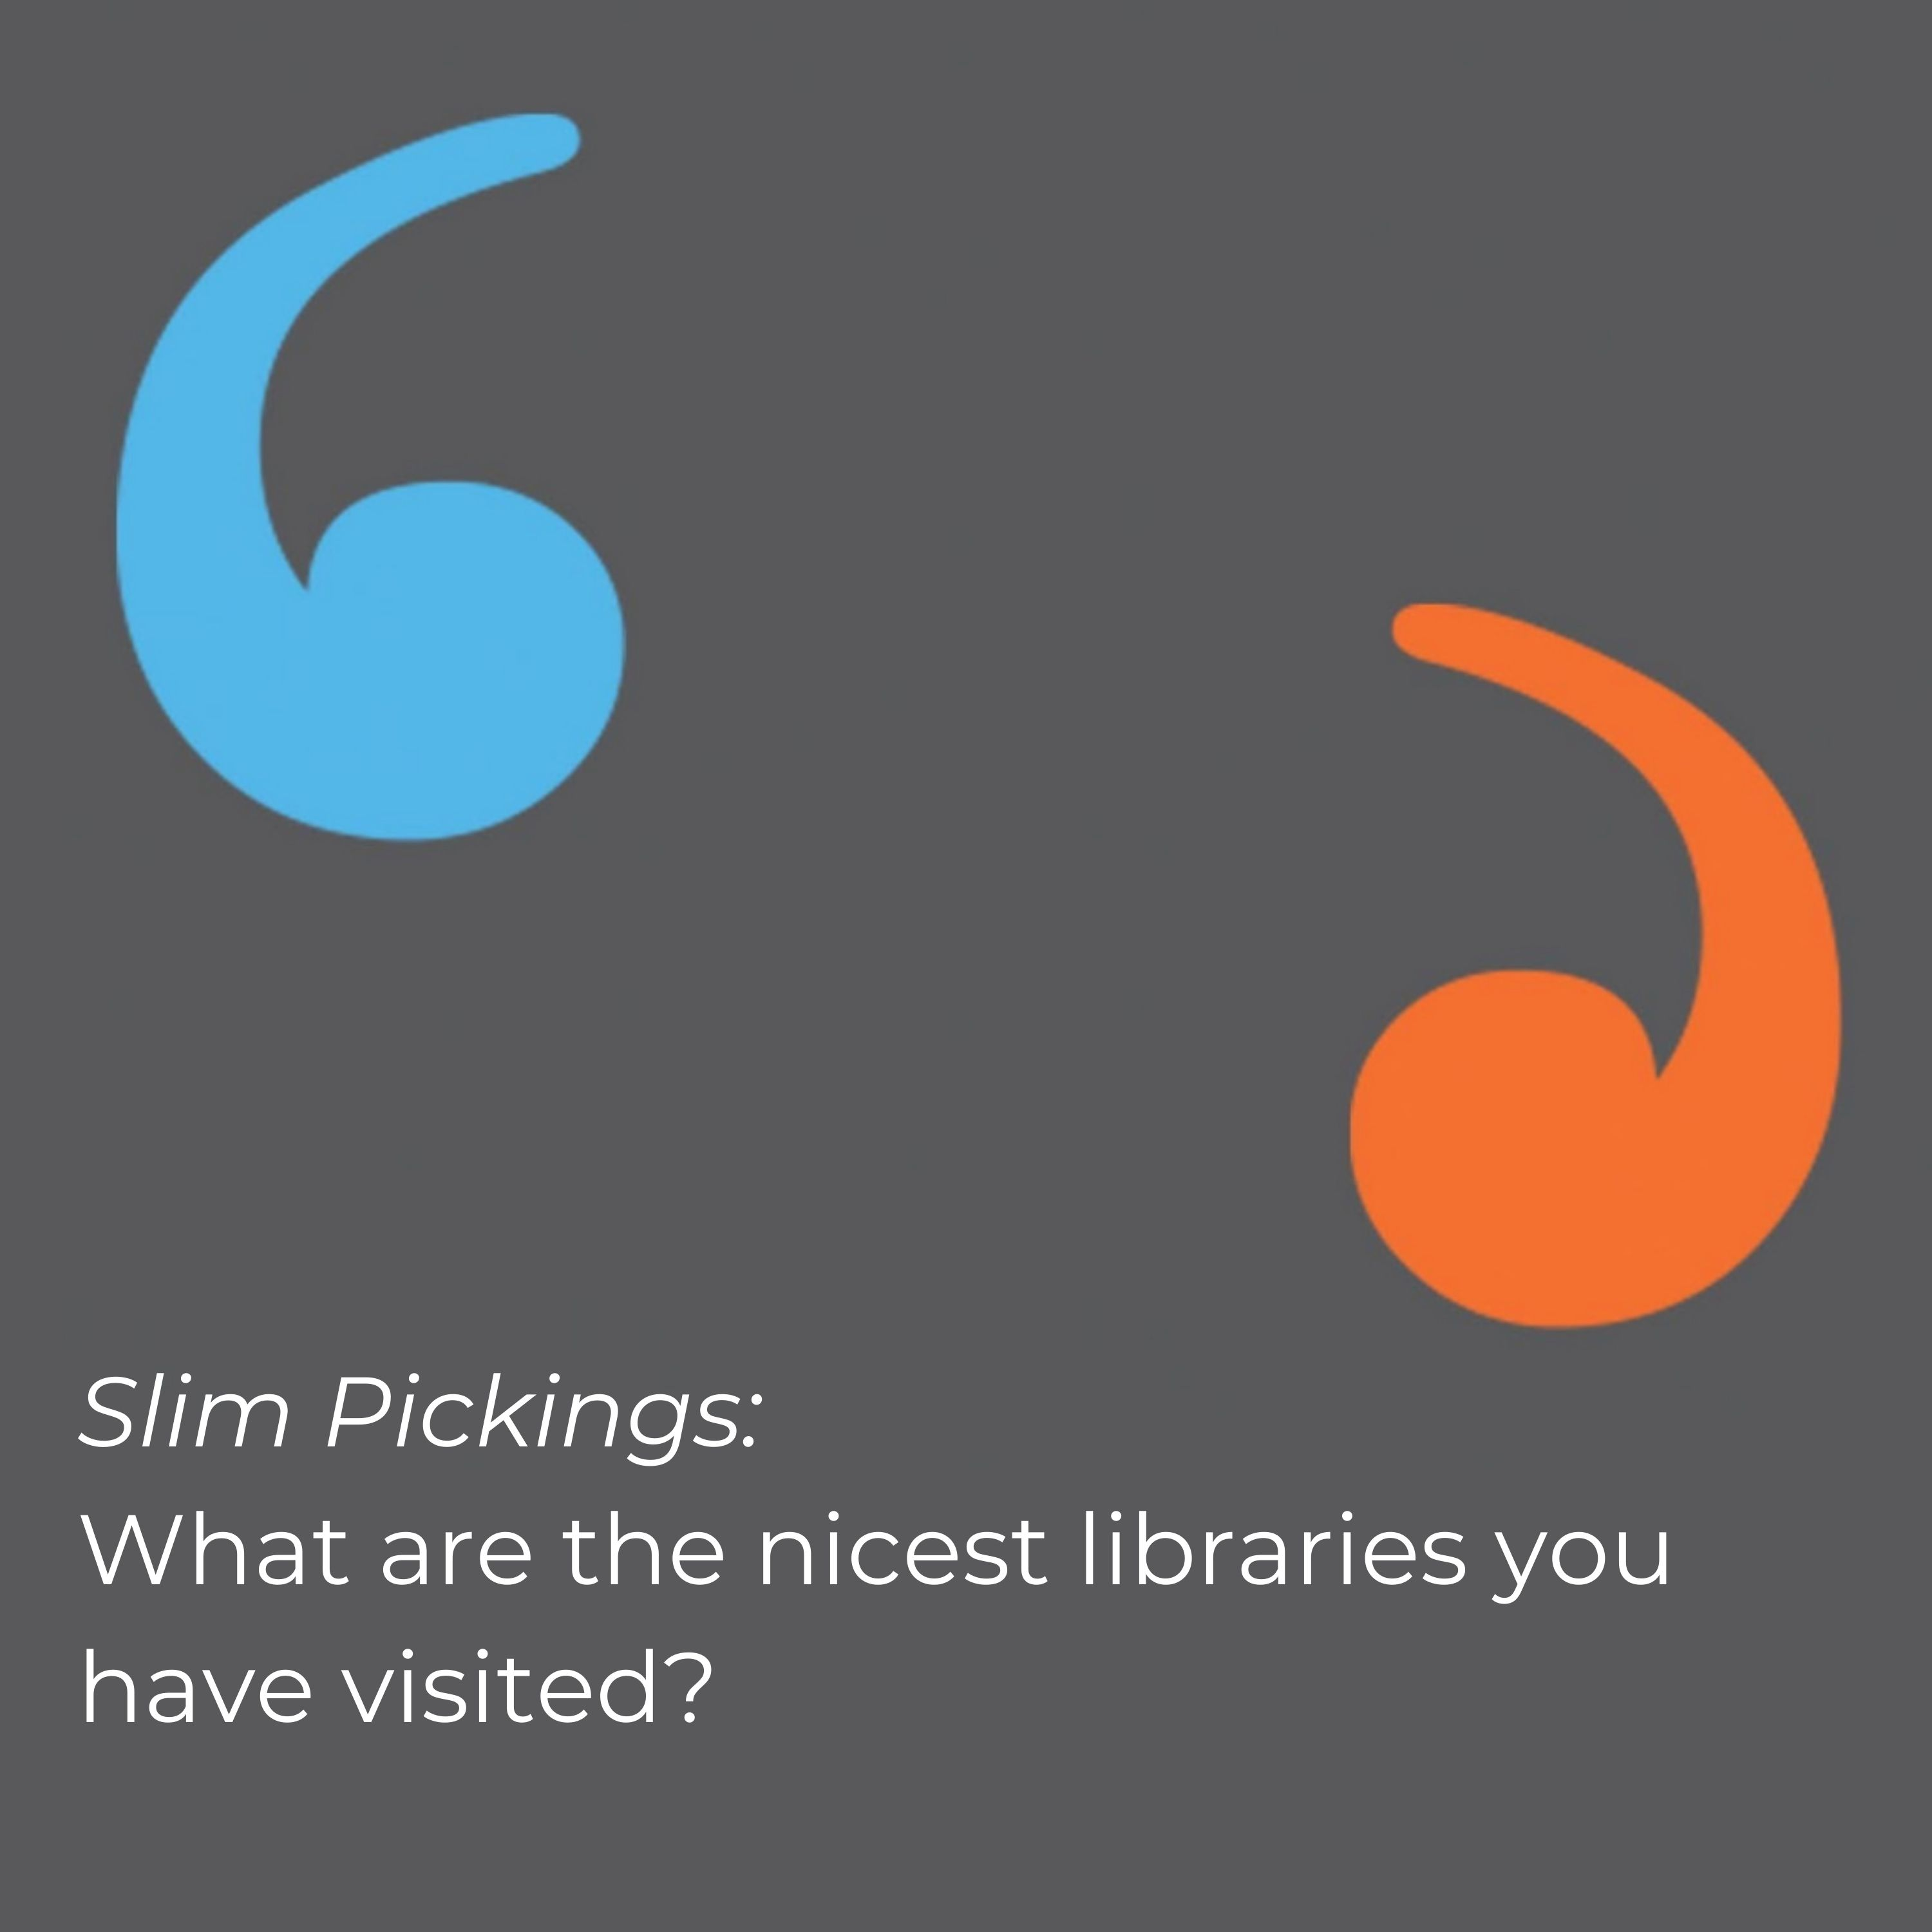 Slim Pickings: What are the nicest libraries you have visited?